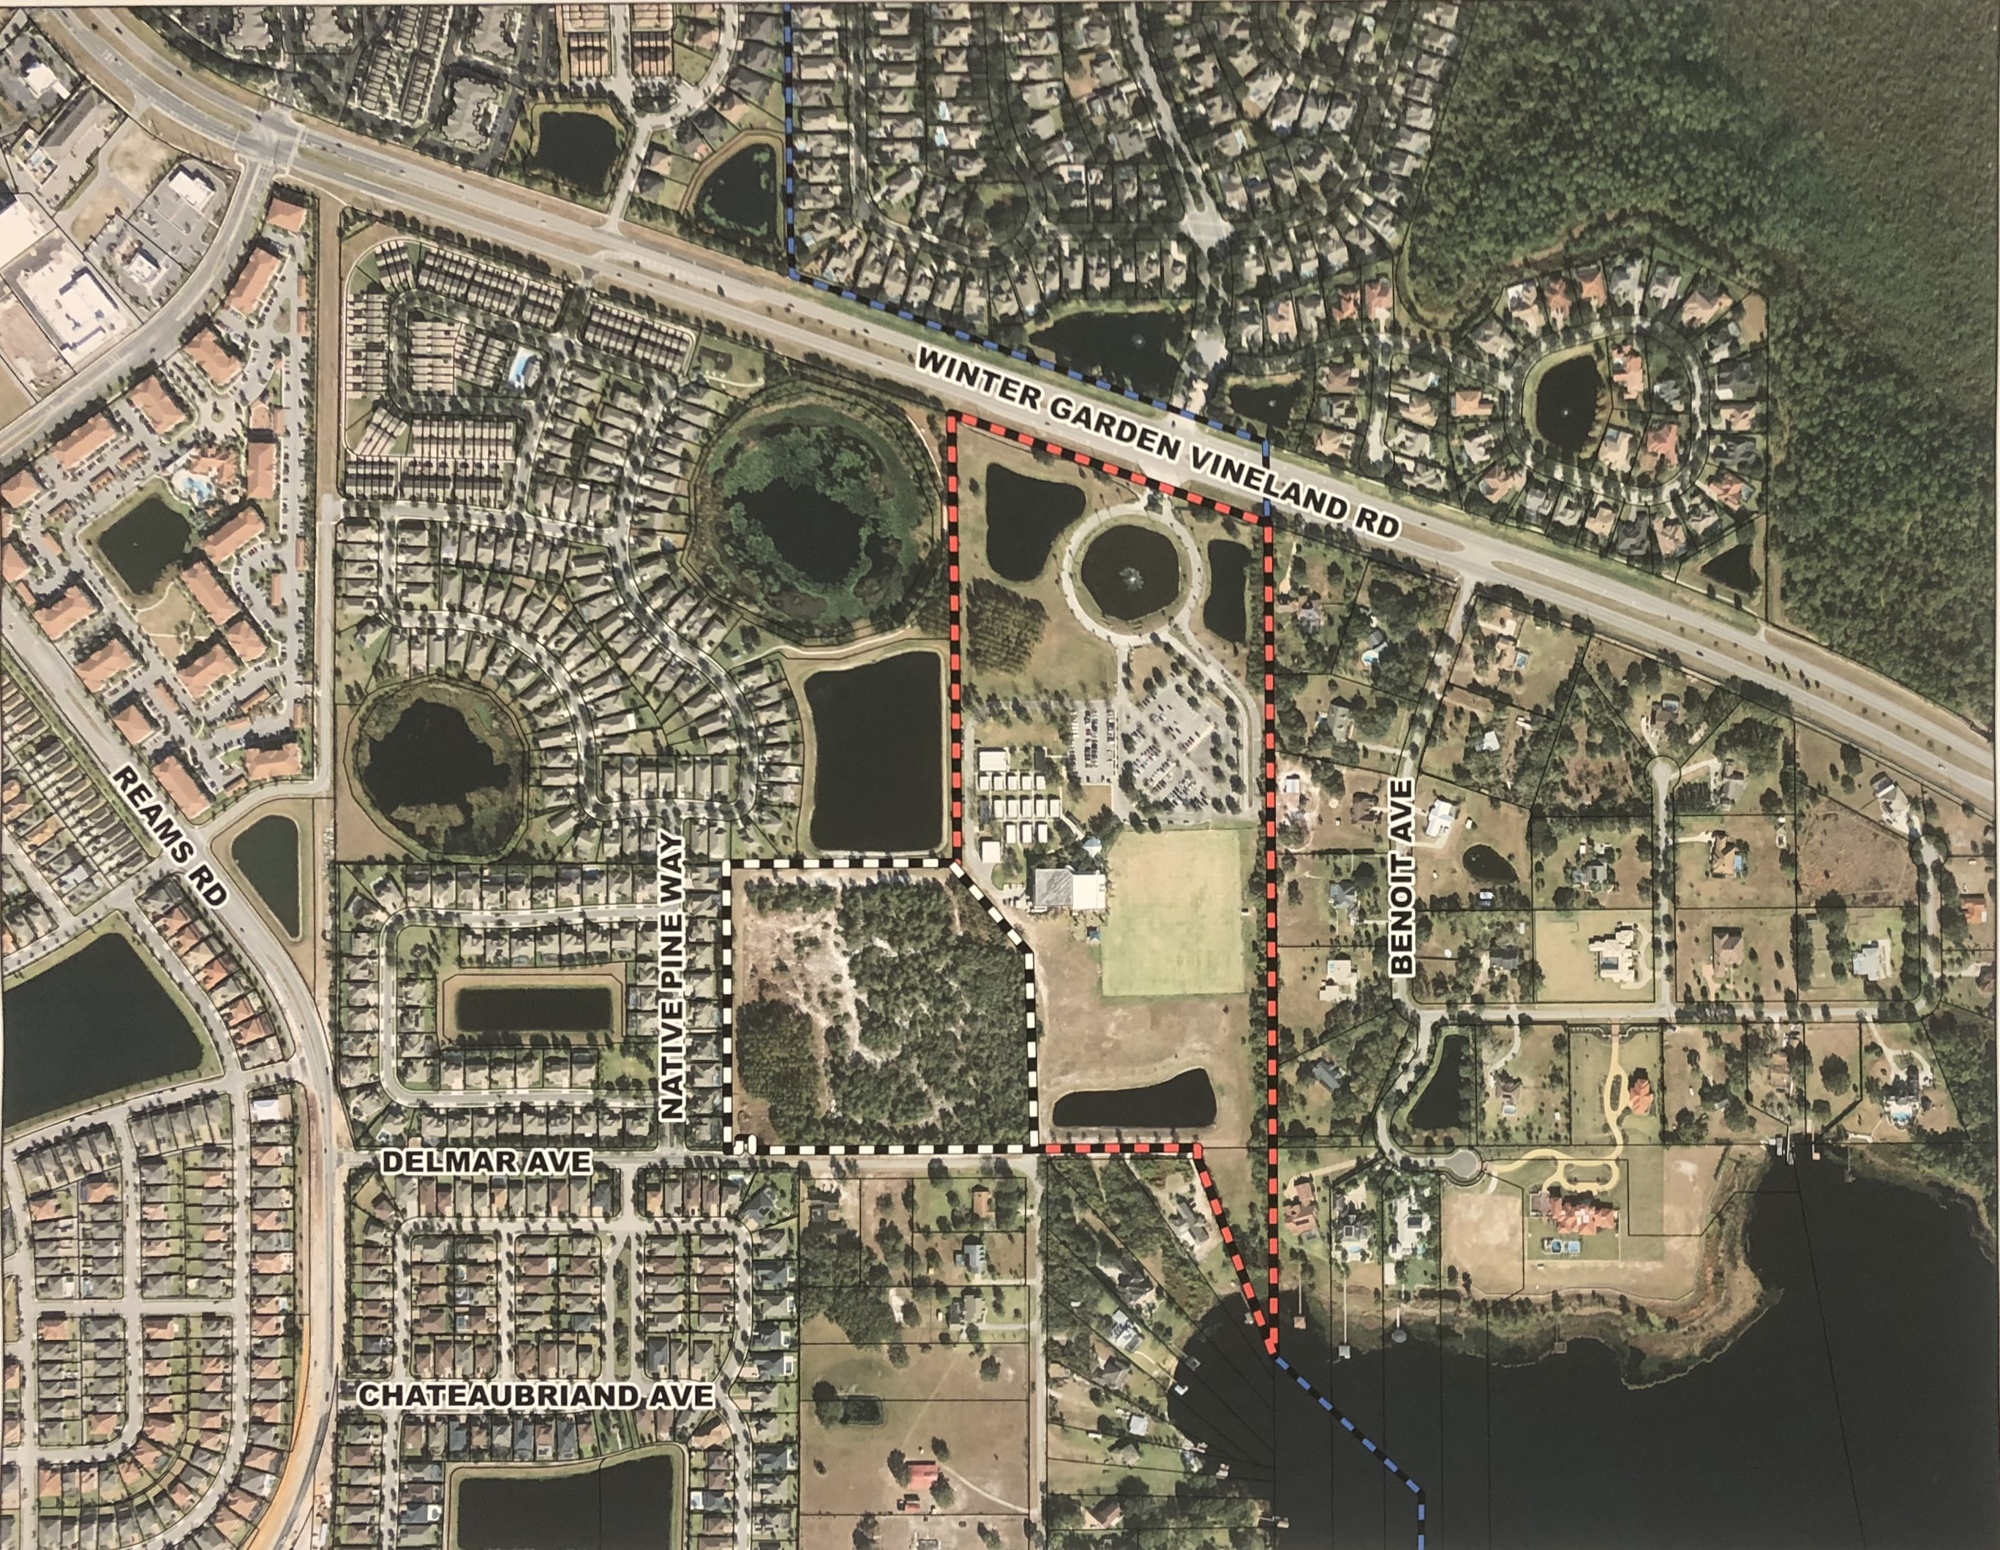 The subject property for the proposed development is outlined in black and white and is generally located south of Winter Garden Vineland Road, east of Reams Road and north of Delmar Avenue.